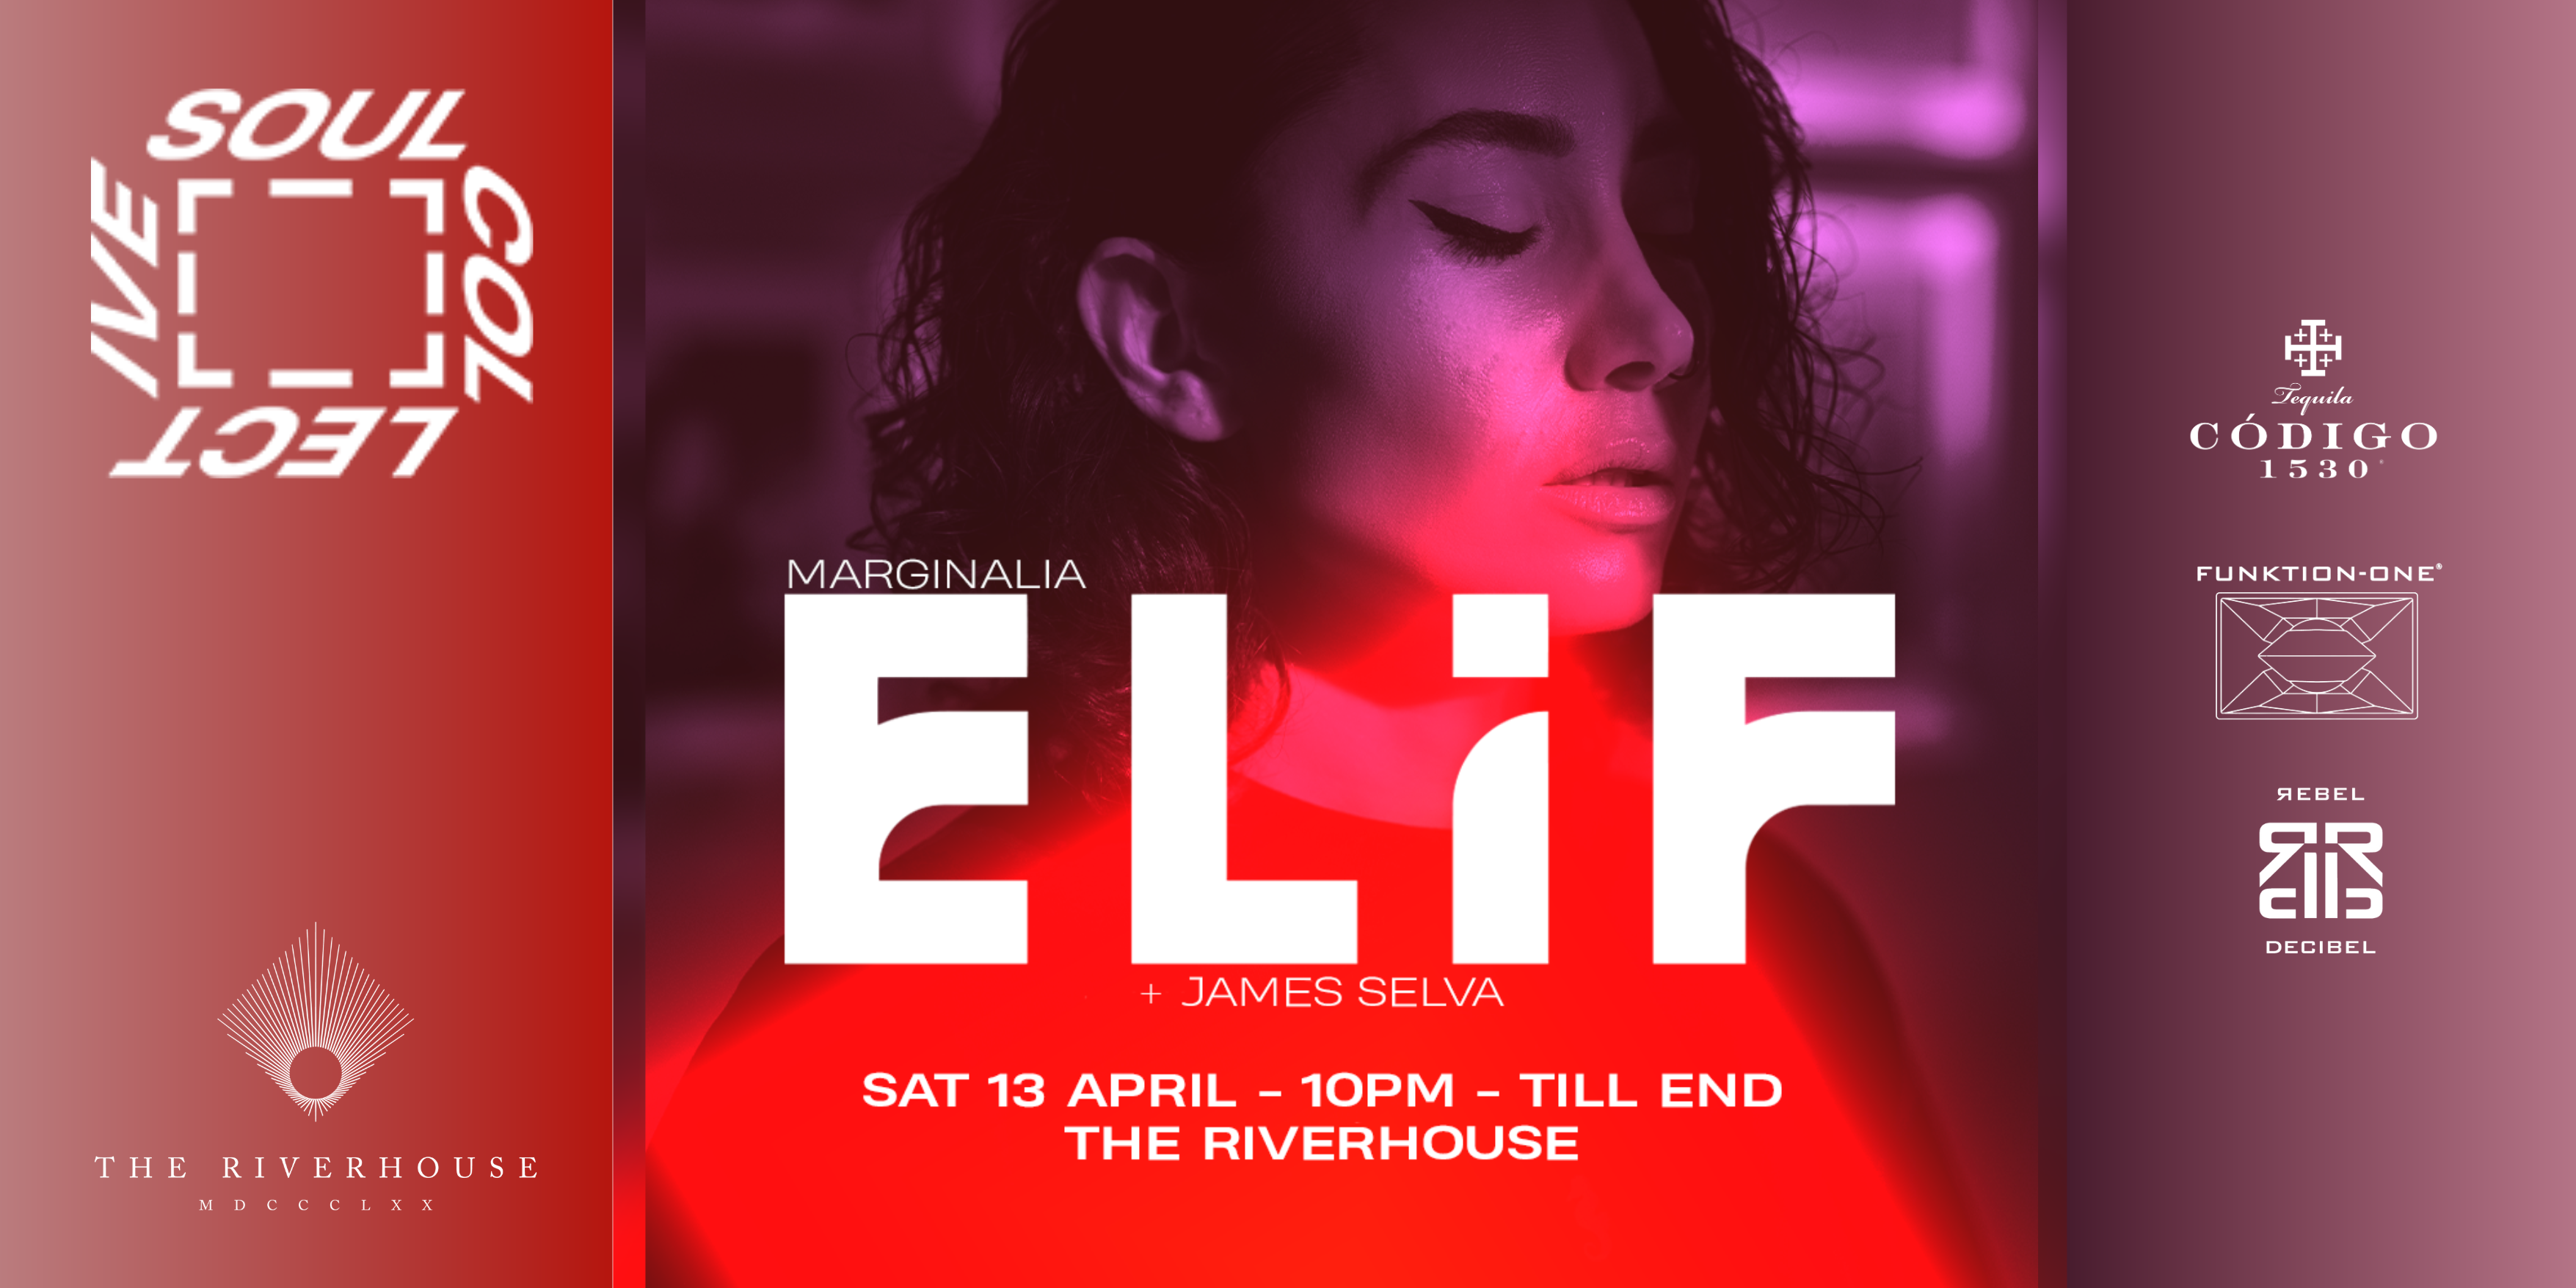 Soul Collective presents Elif - フライヤー表